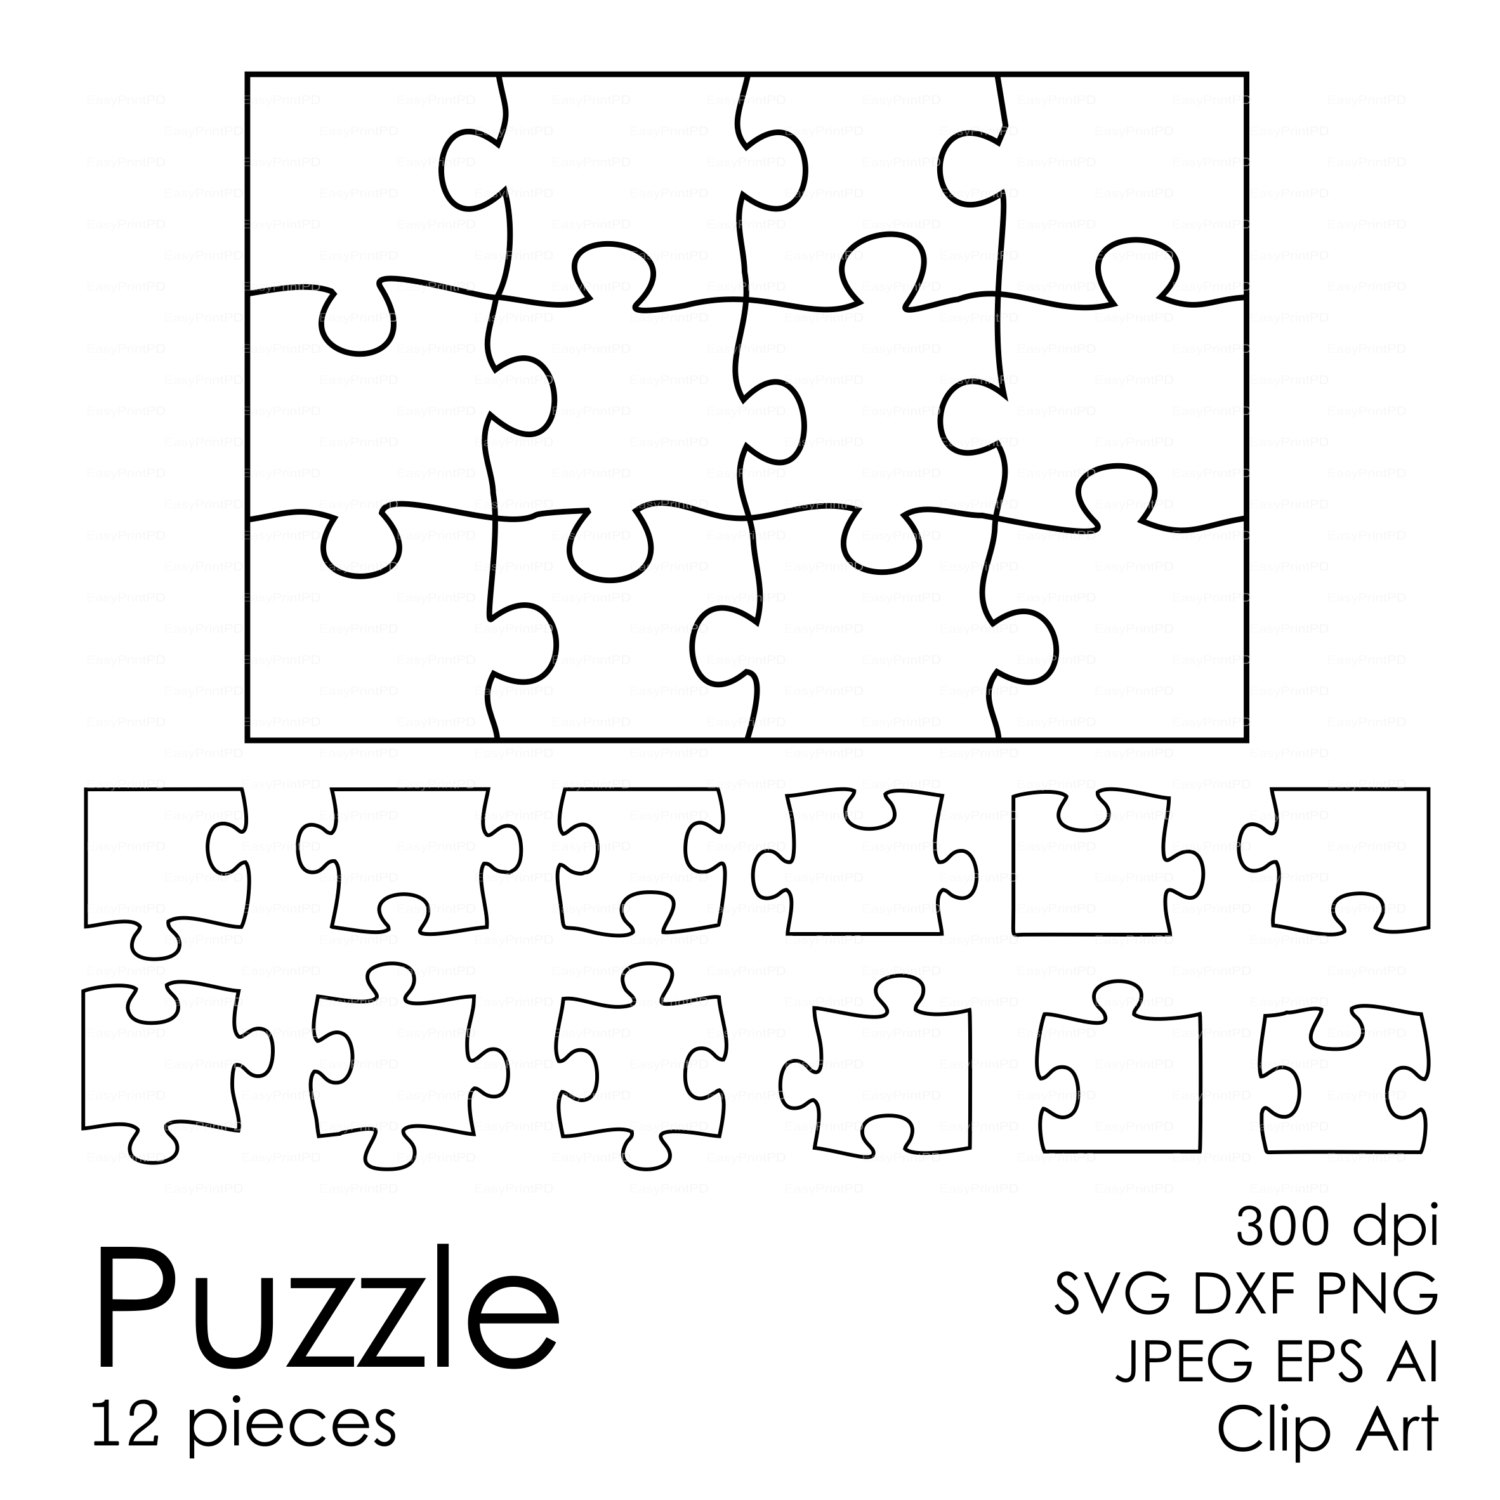 Puzzle svg, Download Puzzle svg for free 2019